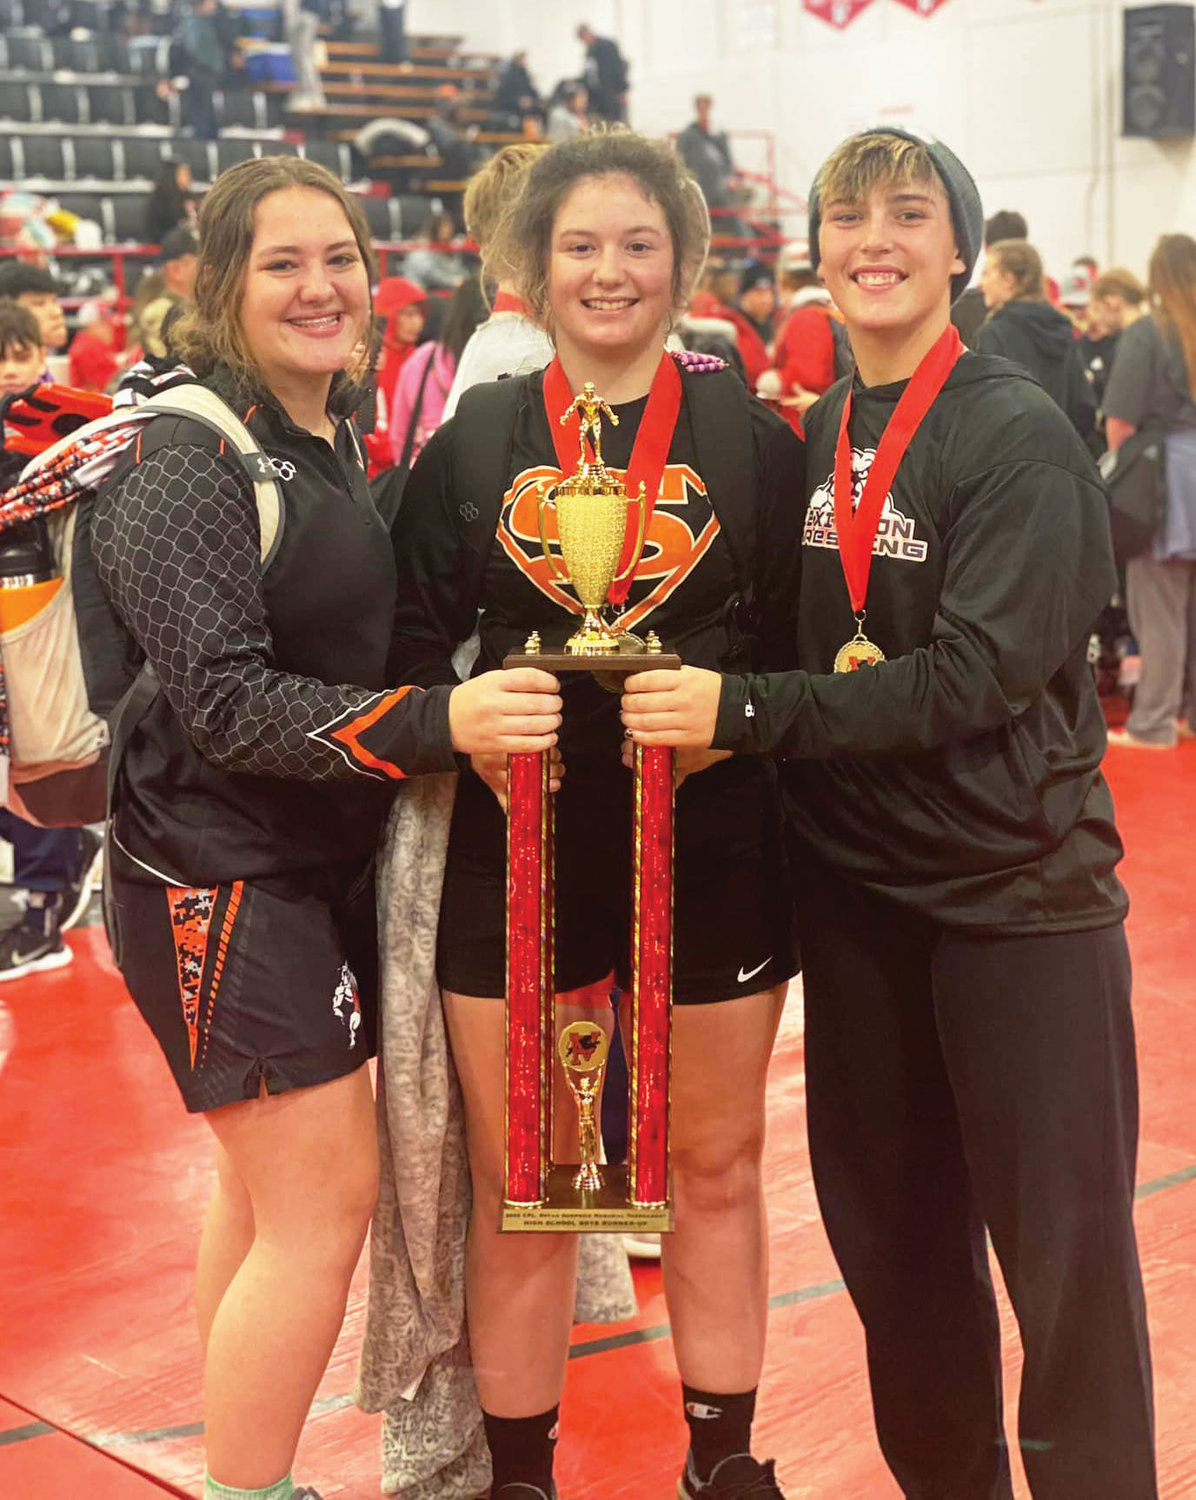 The trio Elexa Collins, Cilee Turner and Izzy Pack hoisted the Pauls Valley team runner-up trophy last weekend.